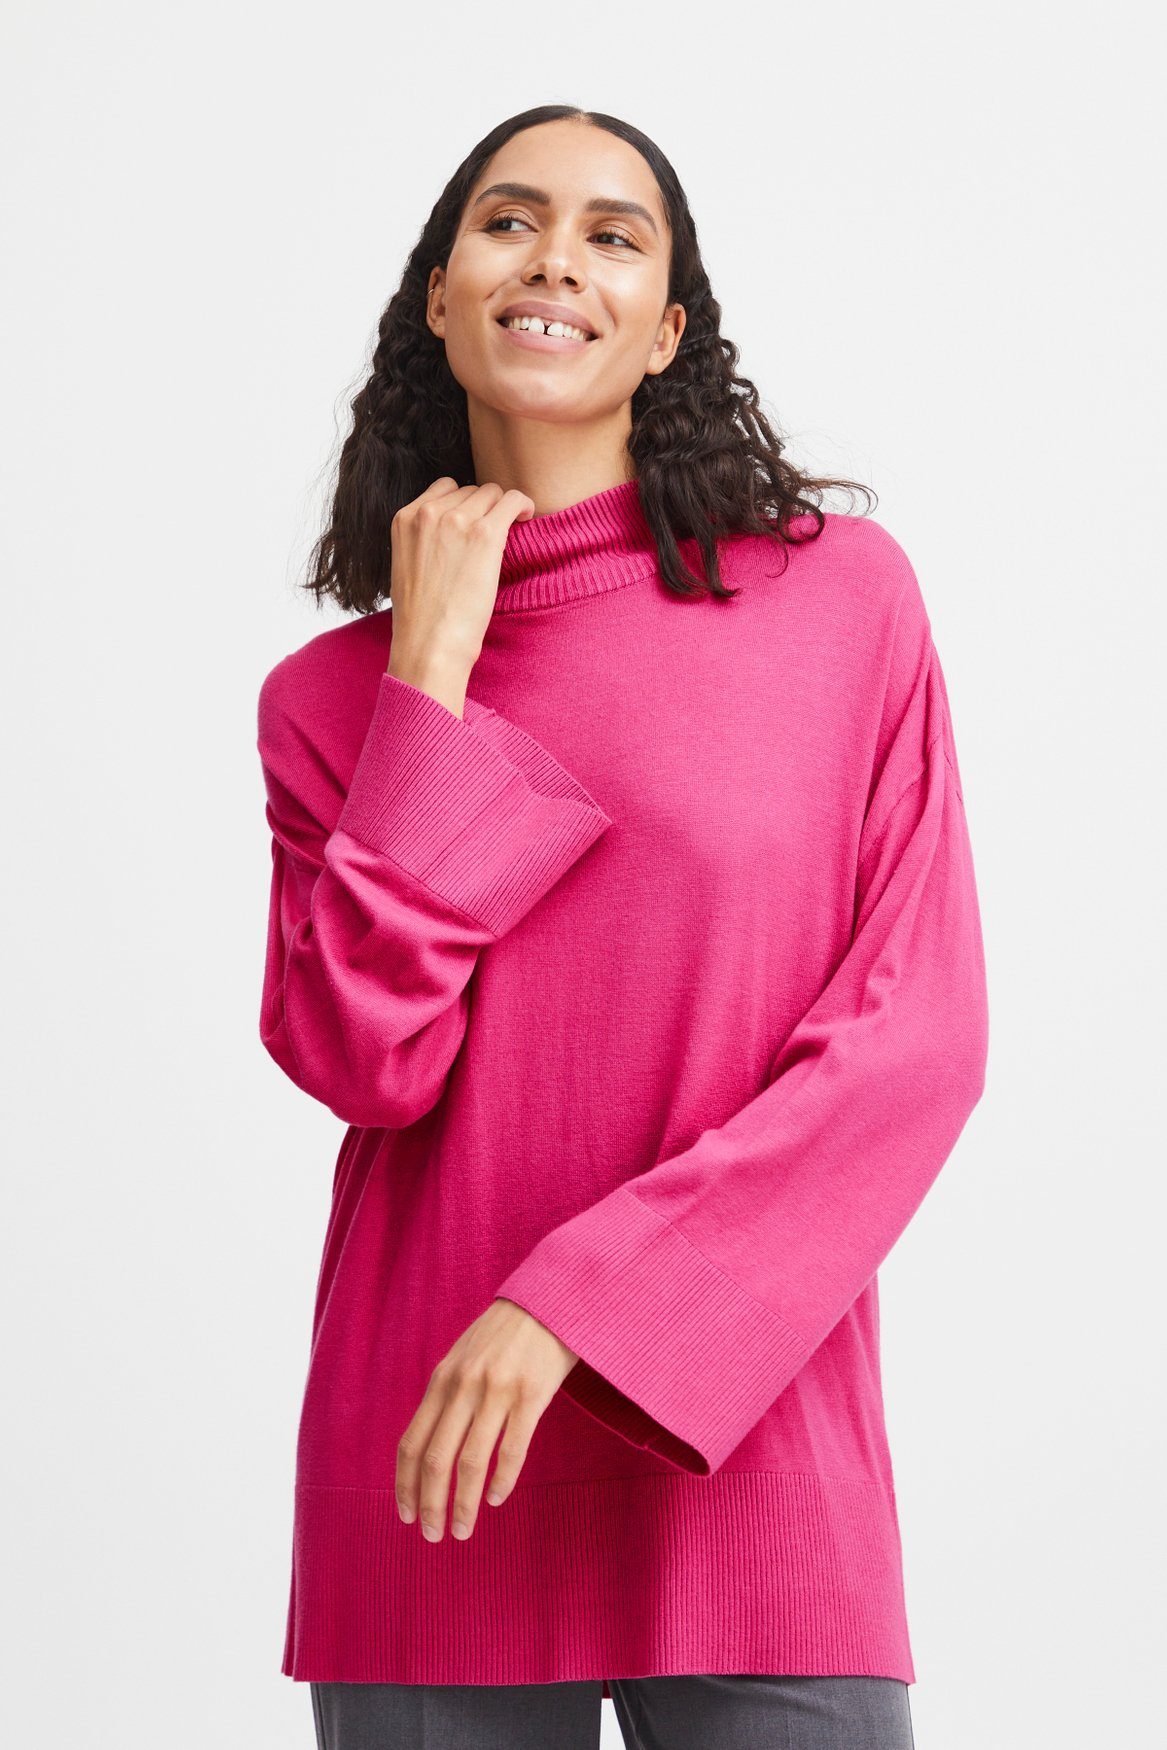 6263 Langarm Shirt Feinstrick in b.young BYMMPIMBA1 Strickpullover Pullover Pink